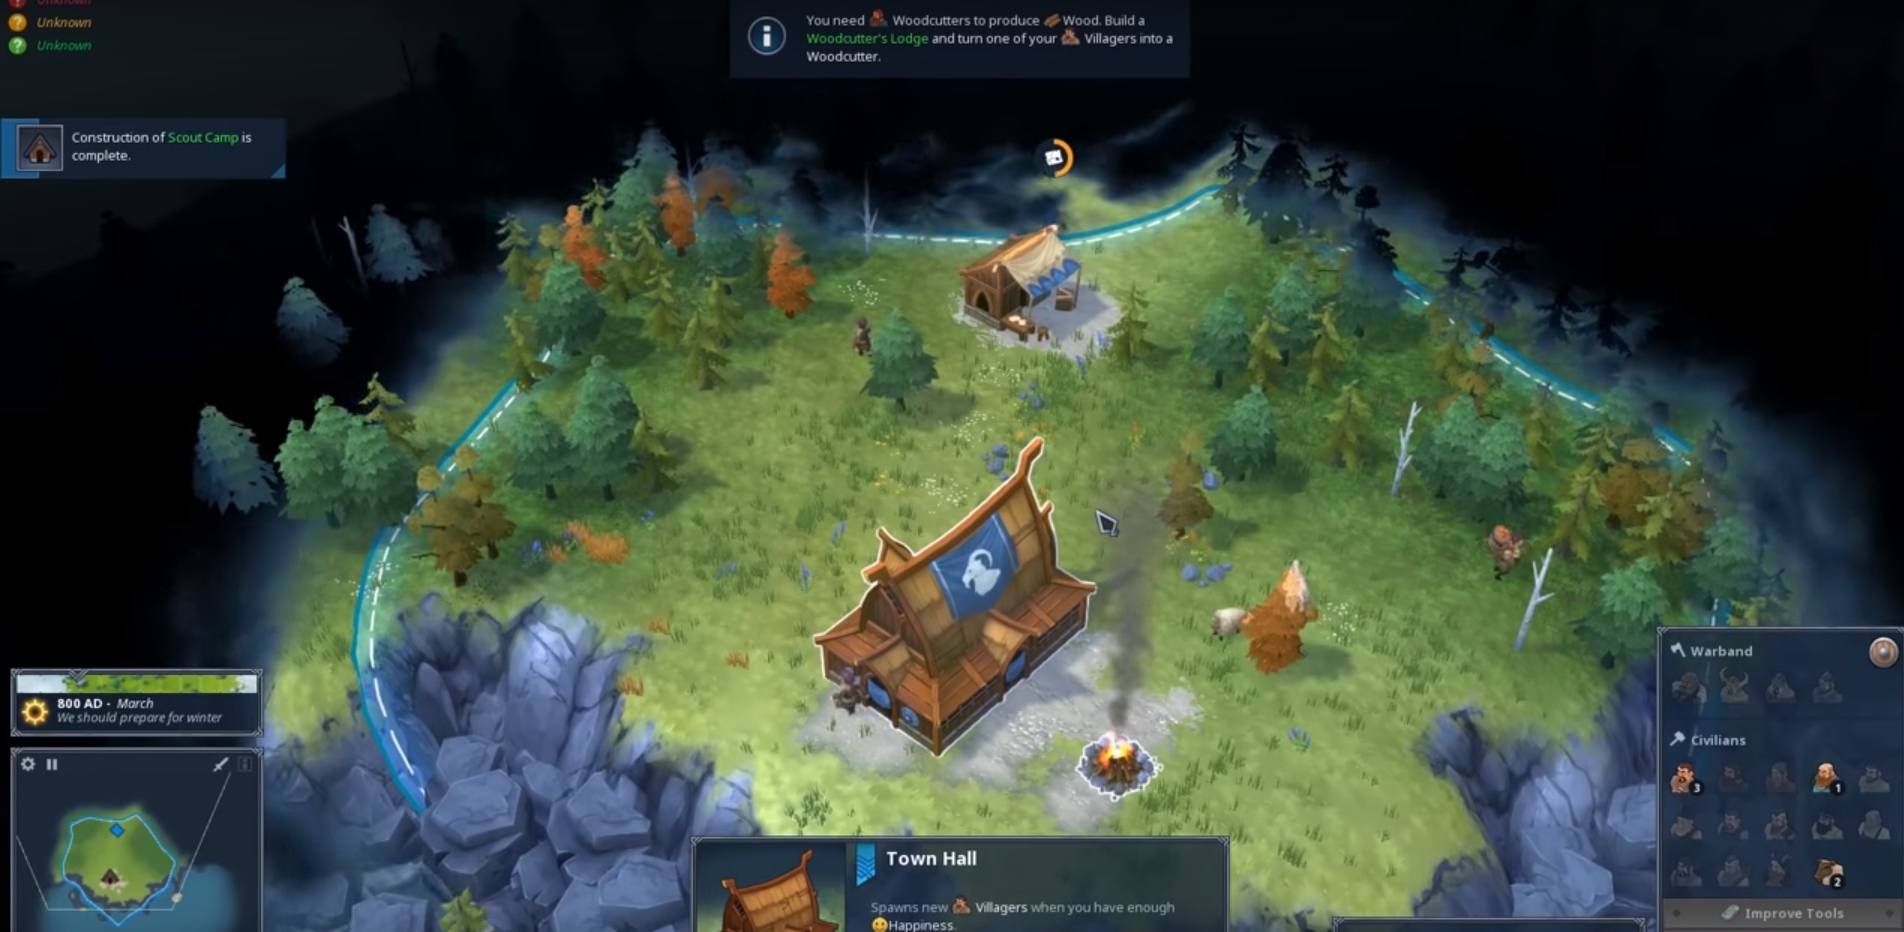 Northgard Gets A Massive Balancing Patch In Response To Fan Feedback